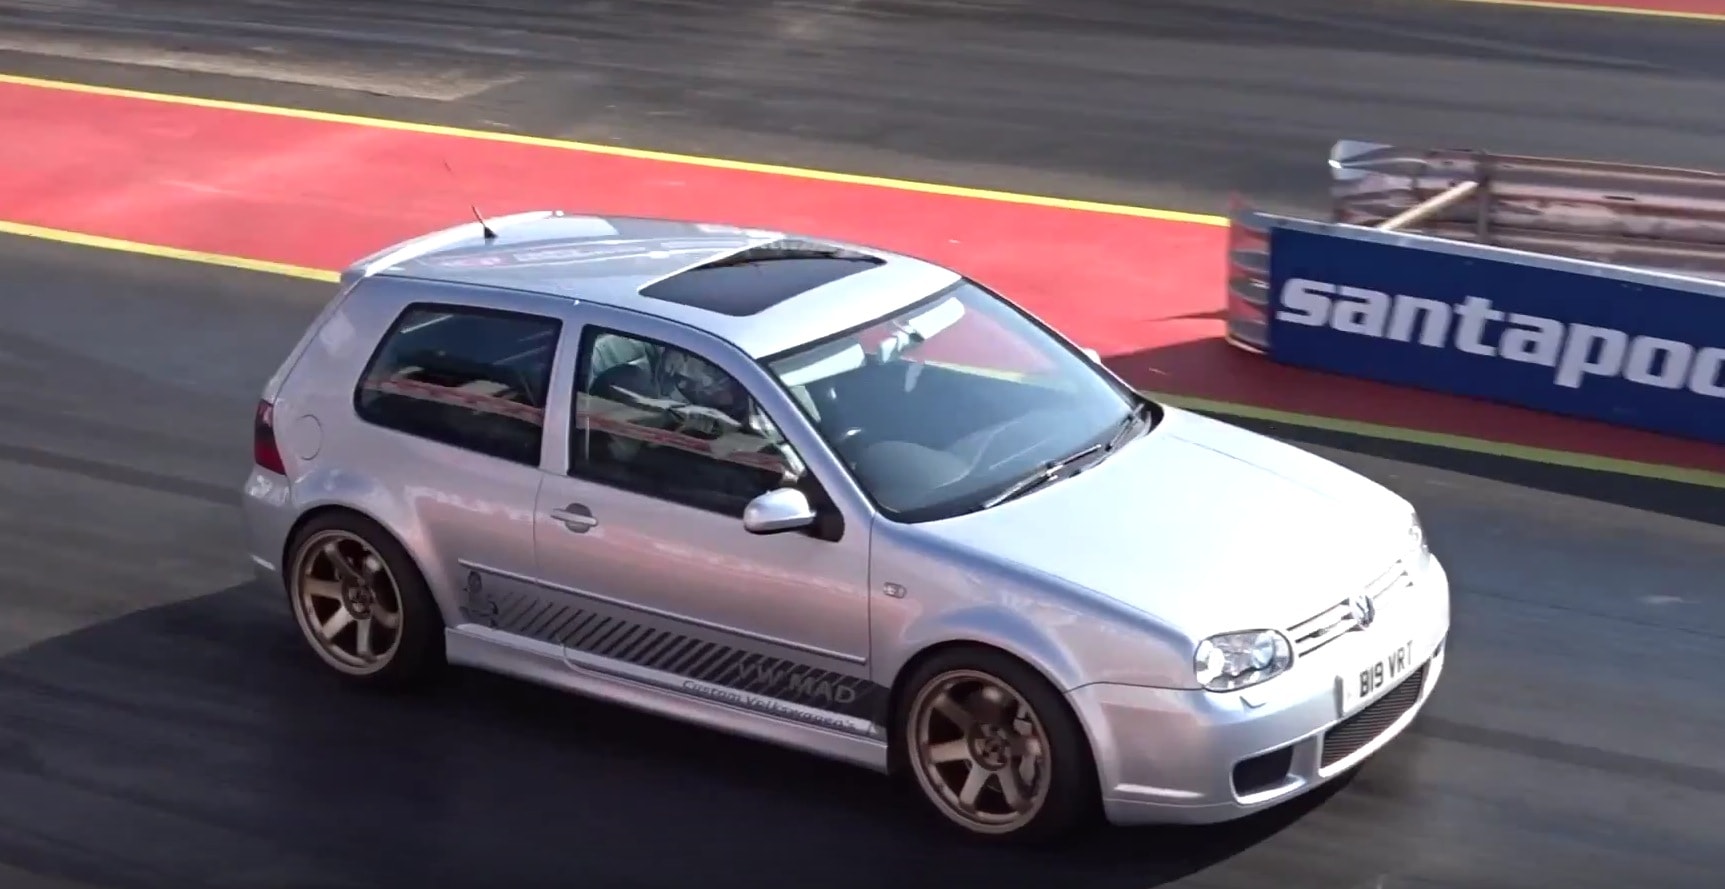 Watch a 550 HP Volkswagen Golf IV R32 Accelerate Like a Bat out of